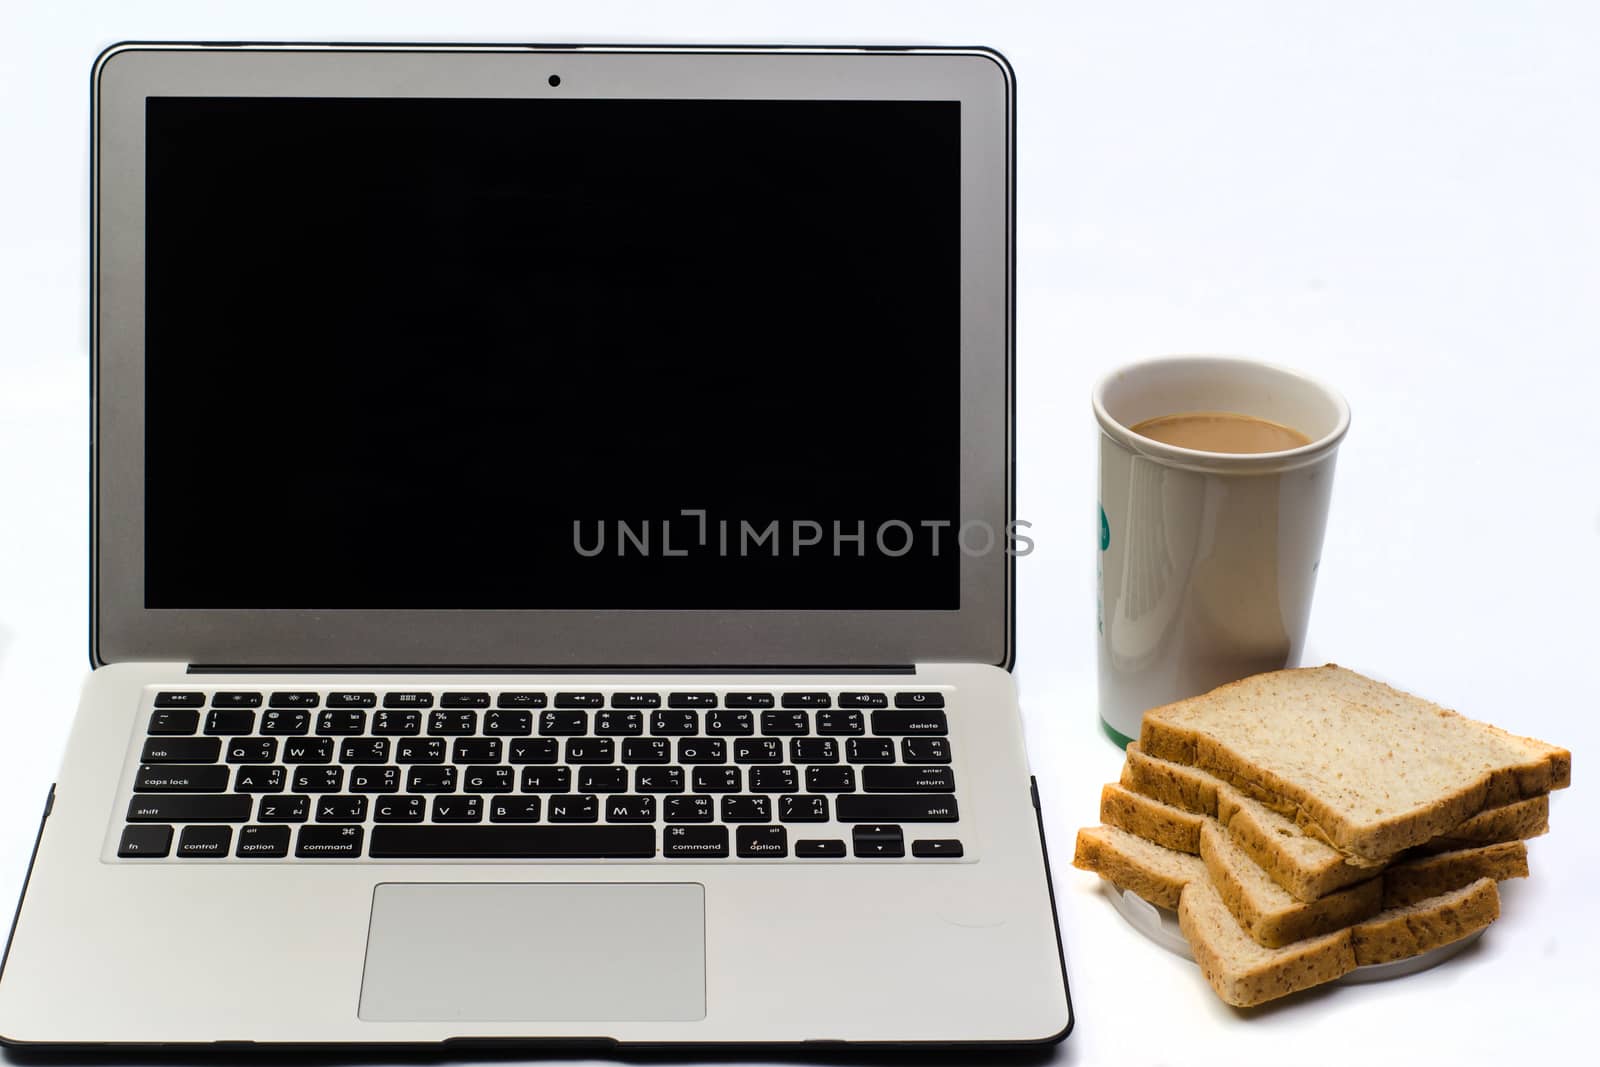 Office desk with laptop, bread and cup of coffee